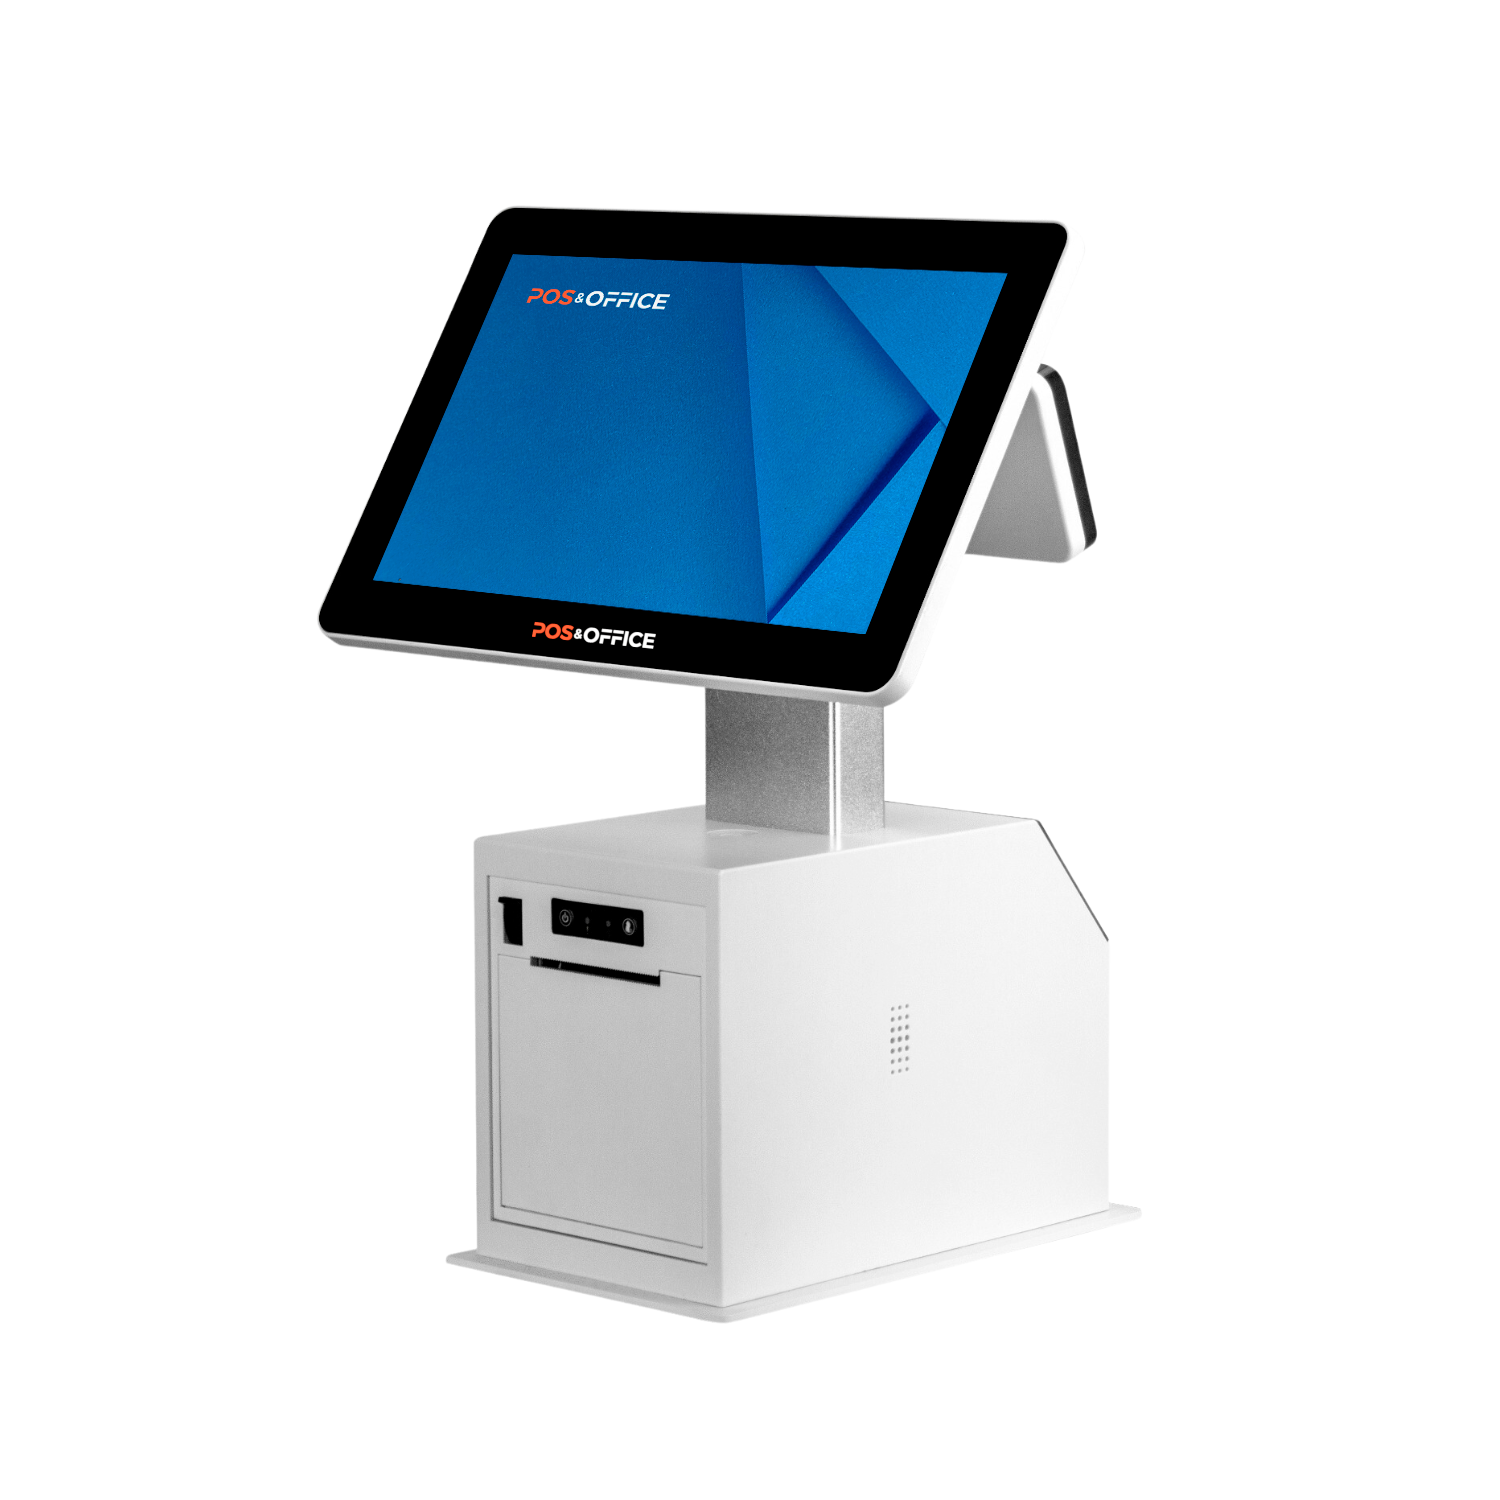 AI120, Android, Windows, all in one, all in one terminal, android POS, Windows POS, terminal de punto de venta, automação comercial, AIO, POS, PDV, all in one terminal, terminal de ponto de venda